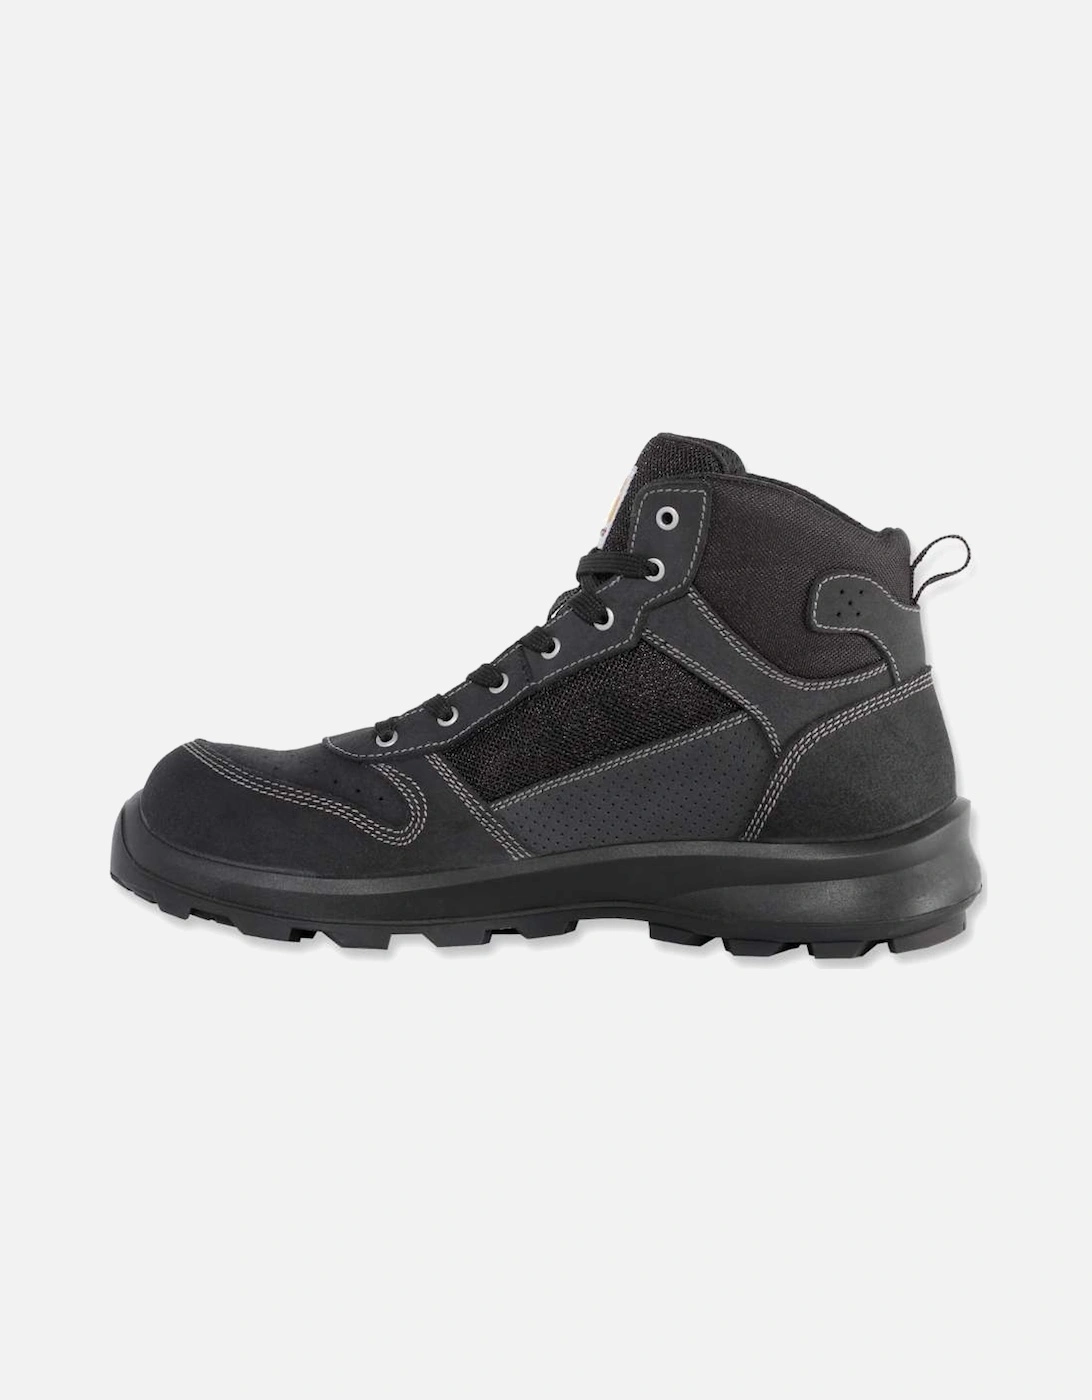 Carhartt Mens Sneaker Nubuck Leather Mid Work Safety Boots